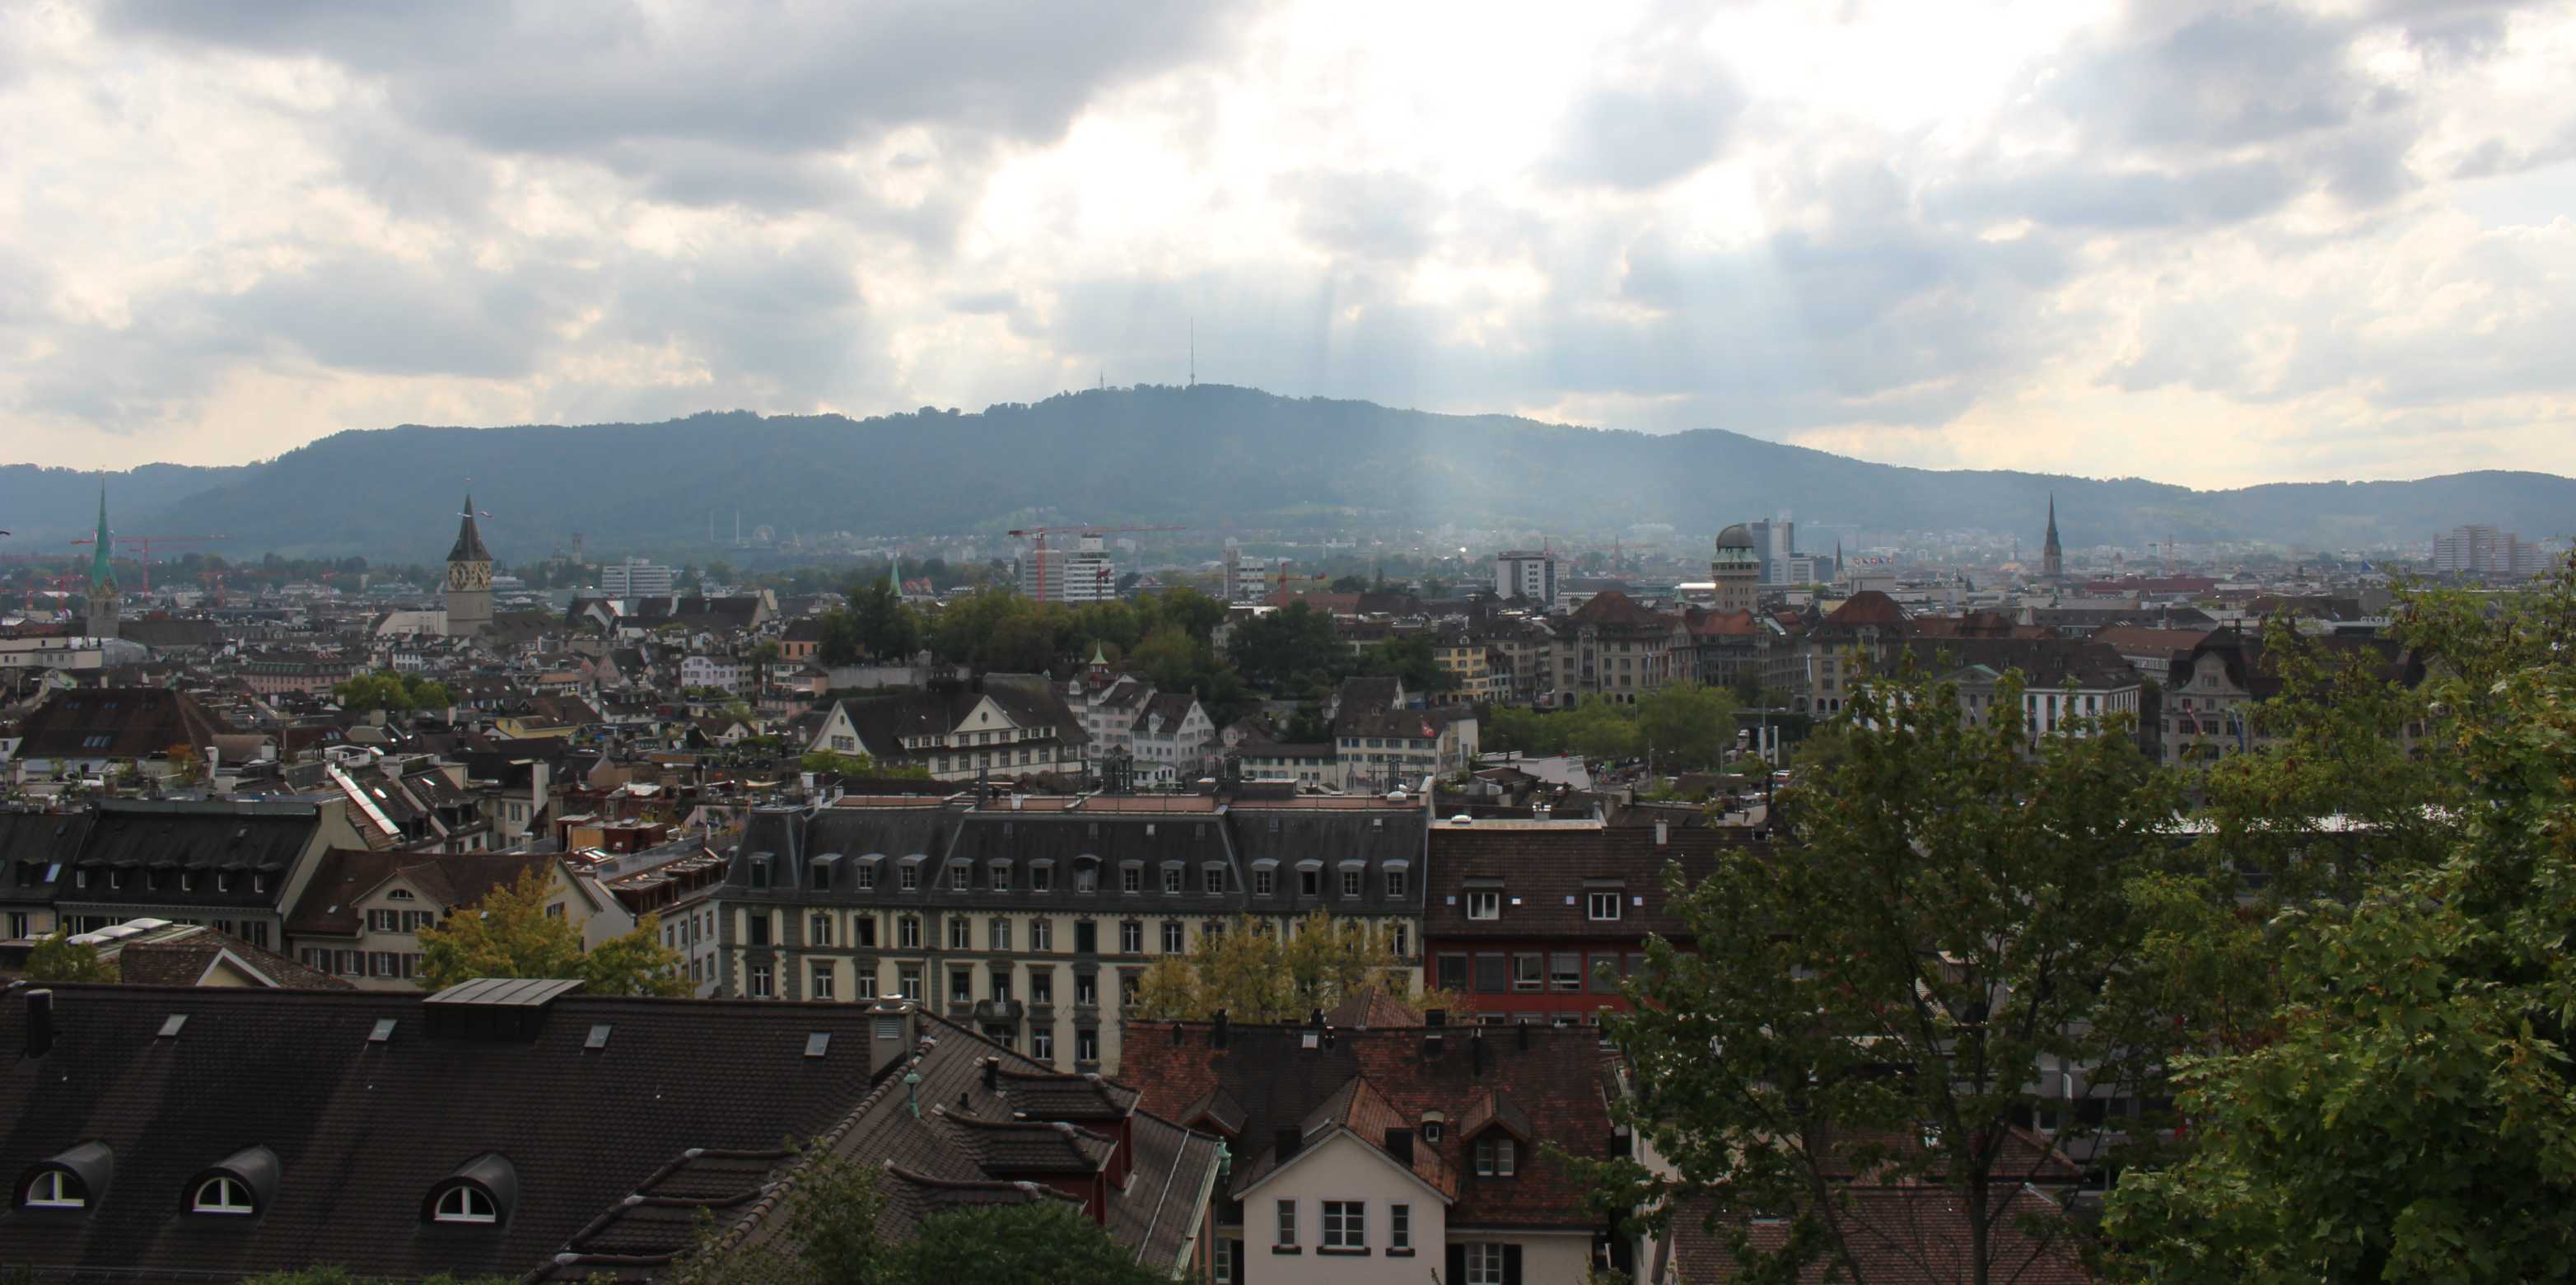 Enlarged view: View on Zürich from the ETH main building (Copyright: Axel Schild)